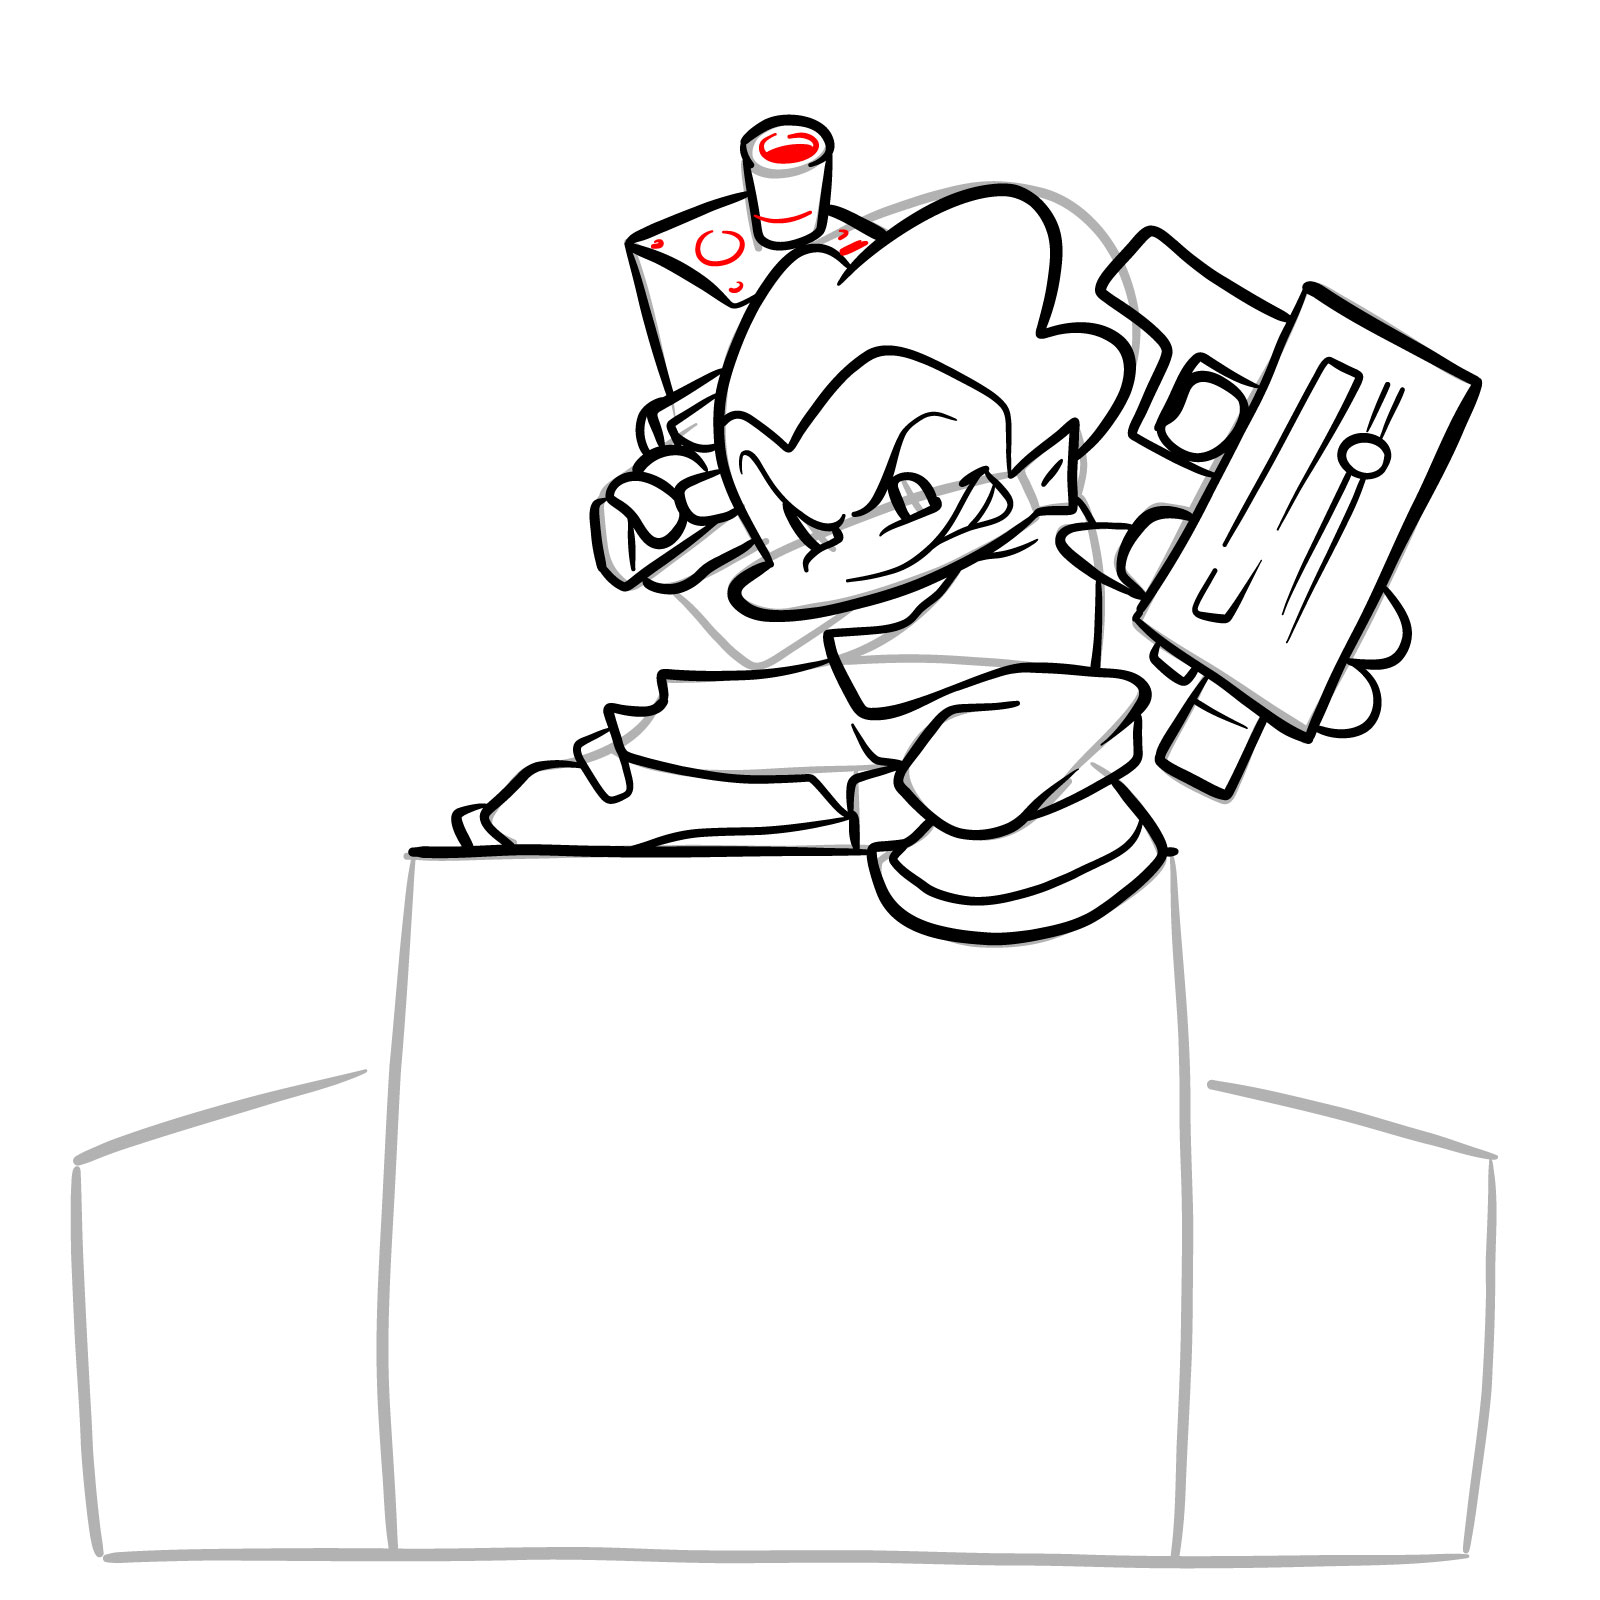 How to draw Pico on the speakers - step 24